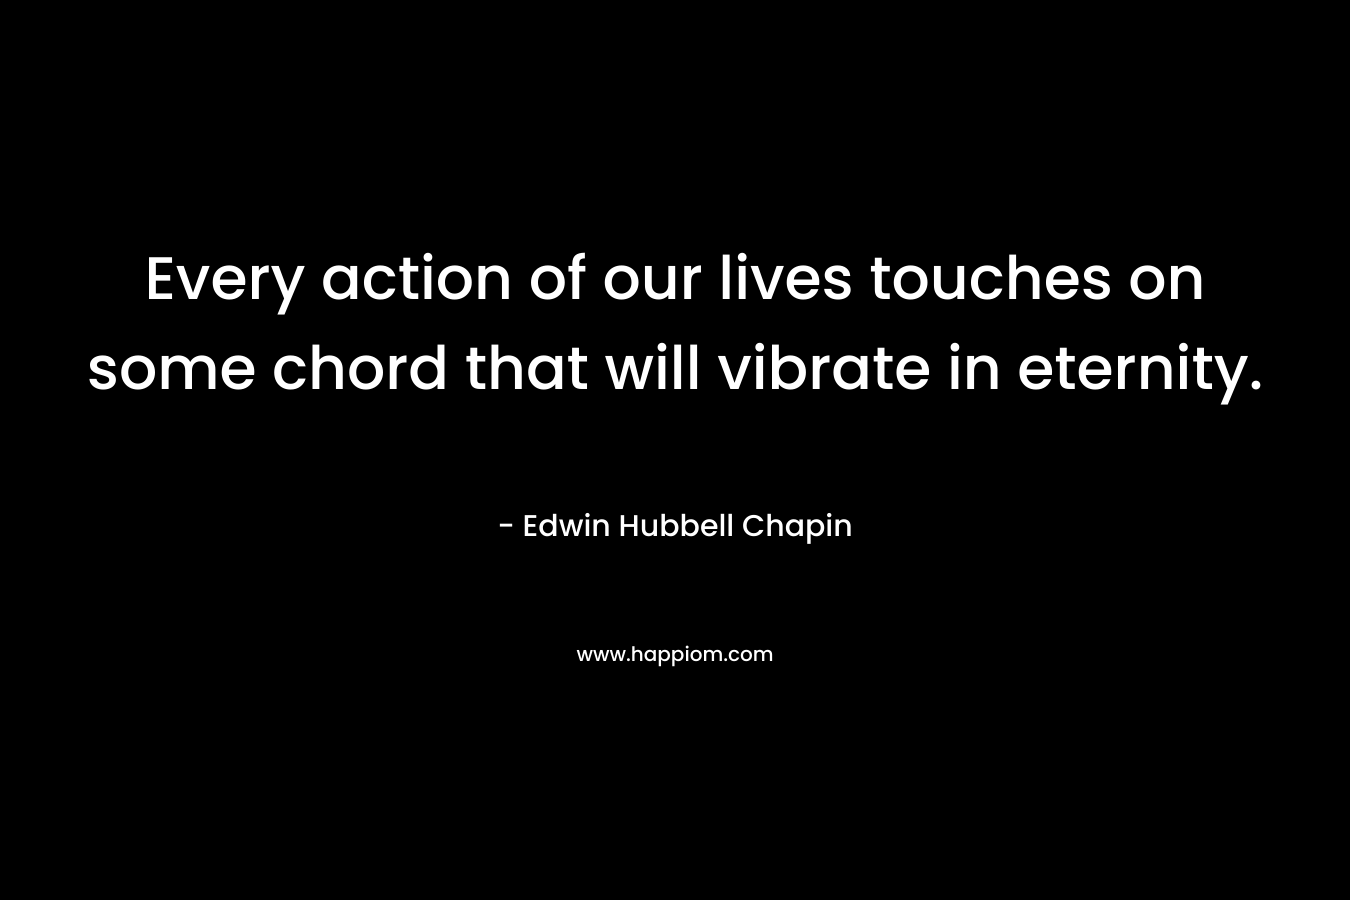 Every action of our lives touches on some chord that will vibrate in eternity. – Edwin Hubbell Chapin